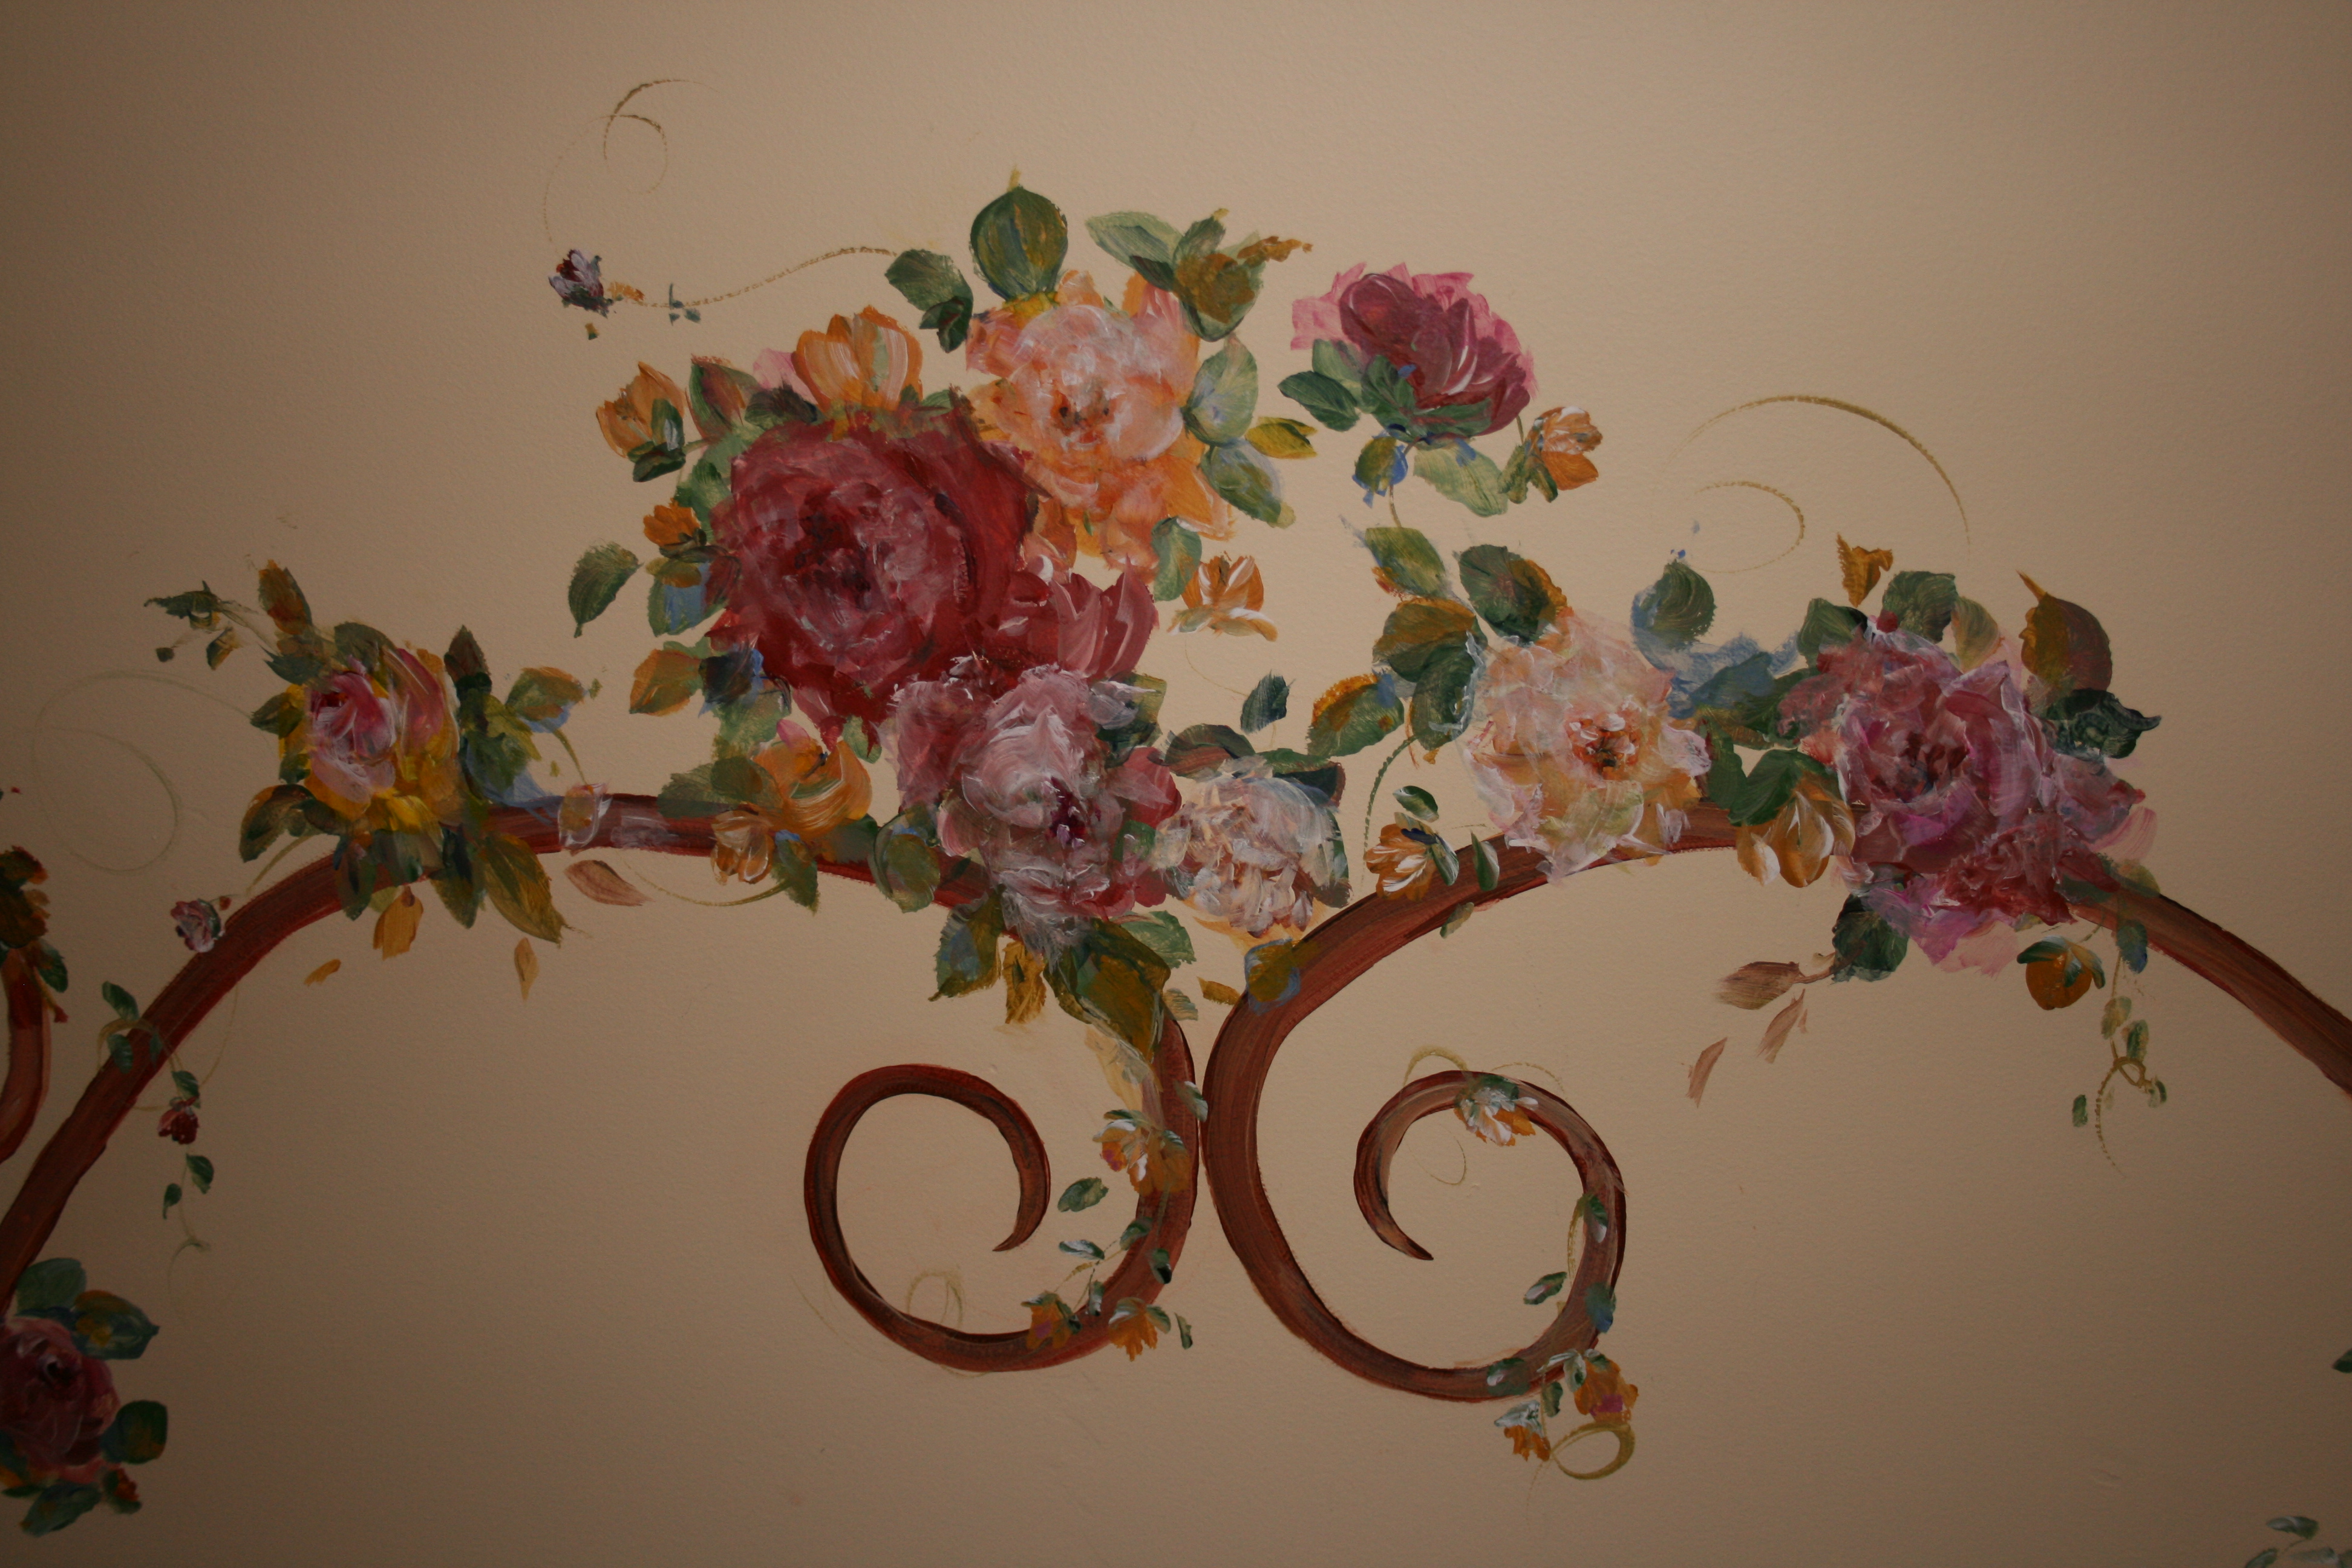 Hand painted rose laced on a scroll - Faux finish texture and colored wall - Vines & Scrolls - By Li